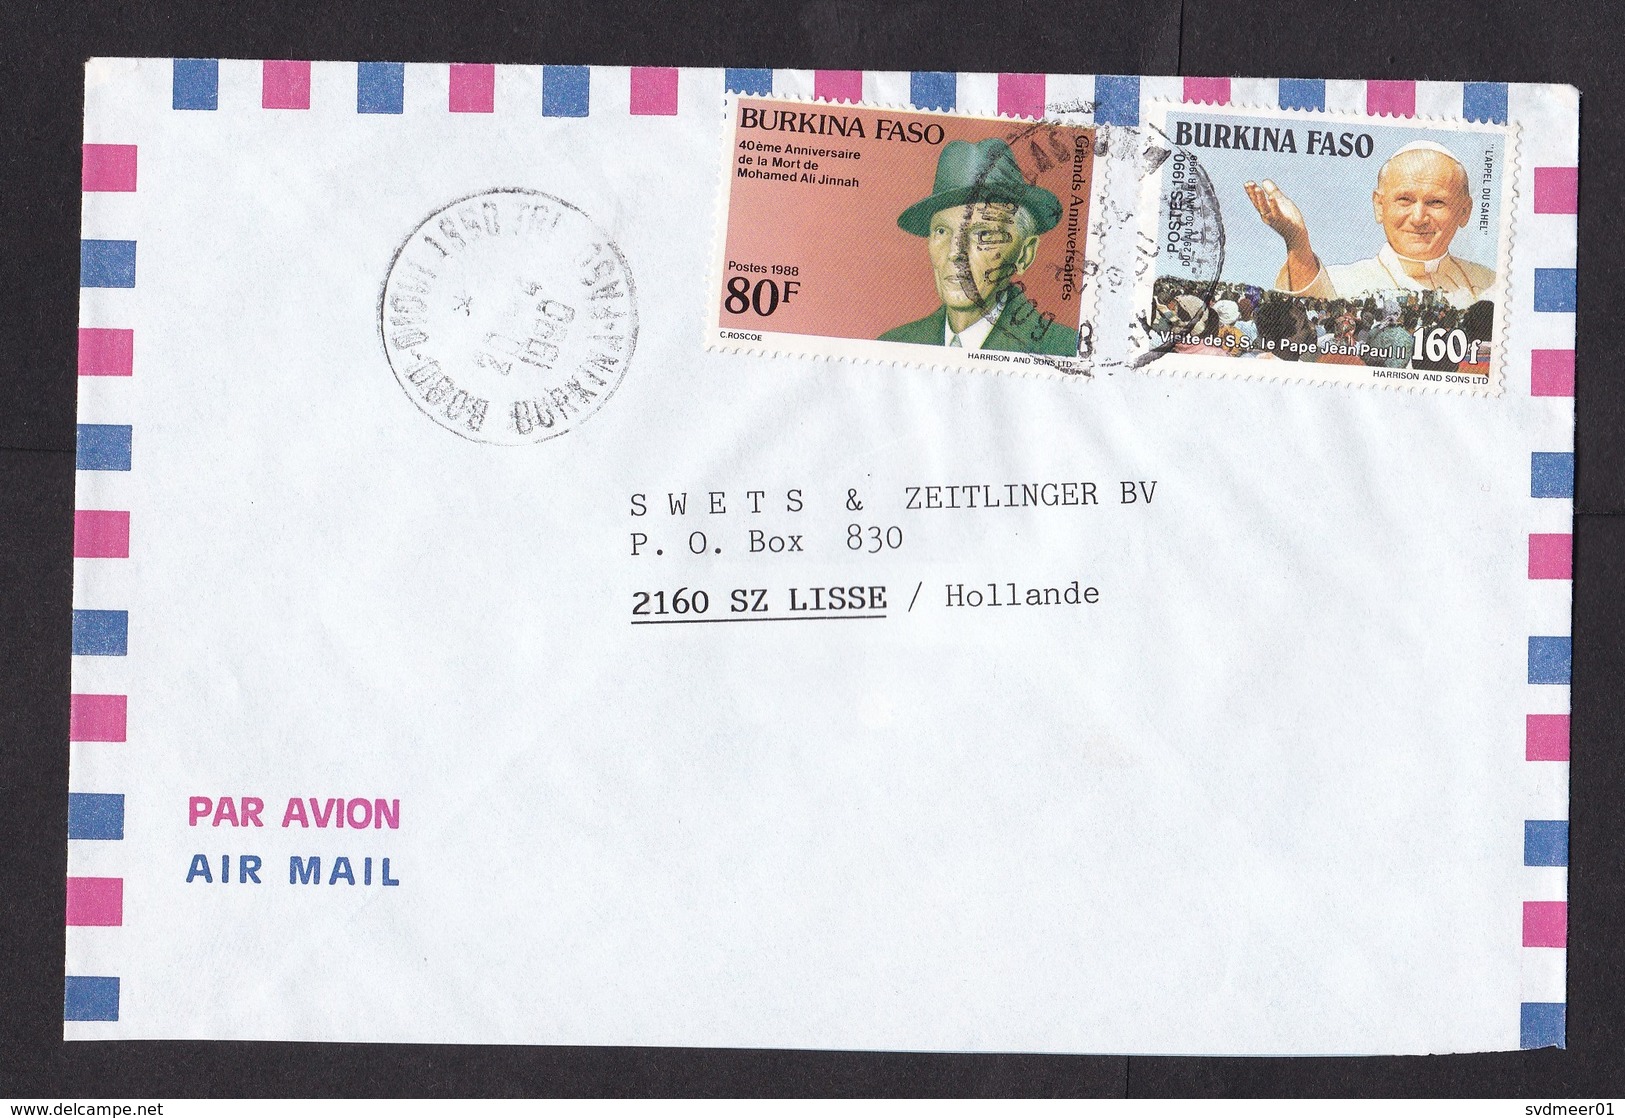 Burkina Faso: Airmail Cover To Netherlands, 1990, 2 Stamps, Jinnah, Pope John Paul, Rare Real Use (traces Of Use) - Burkina Faso (1984-...)